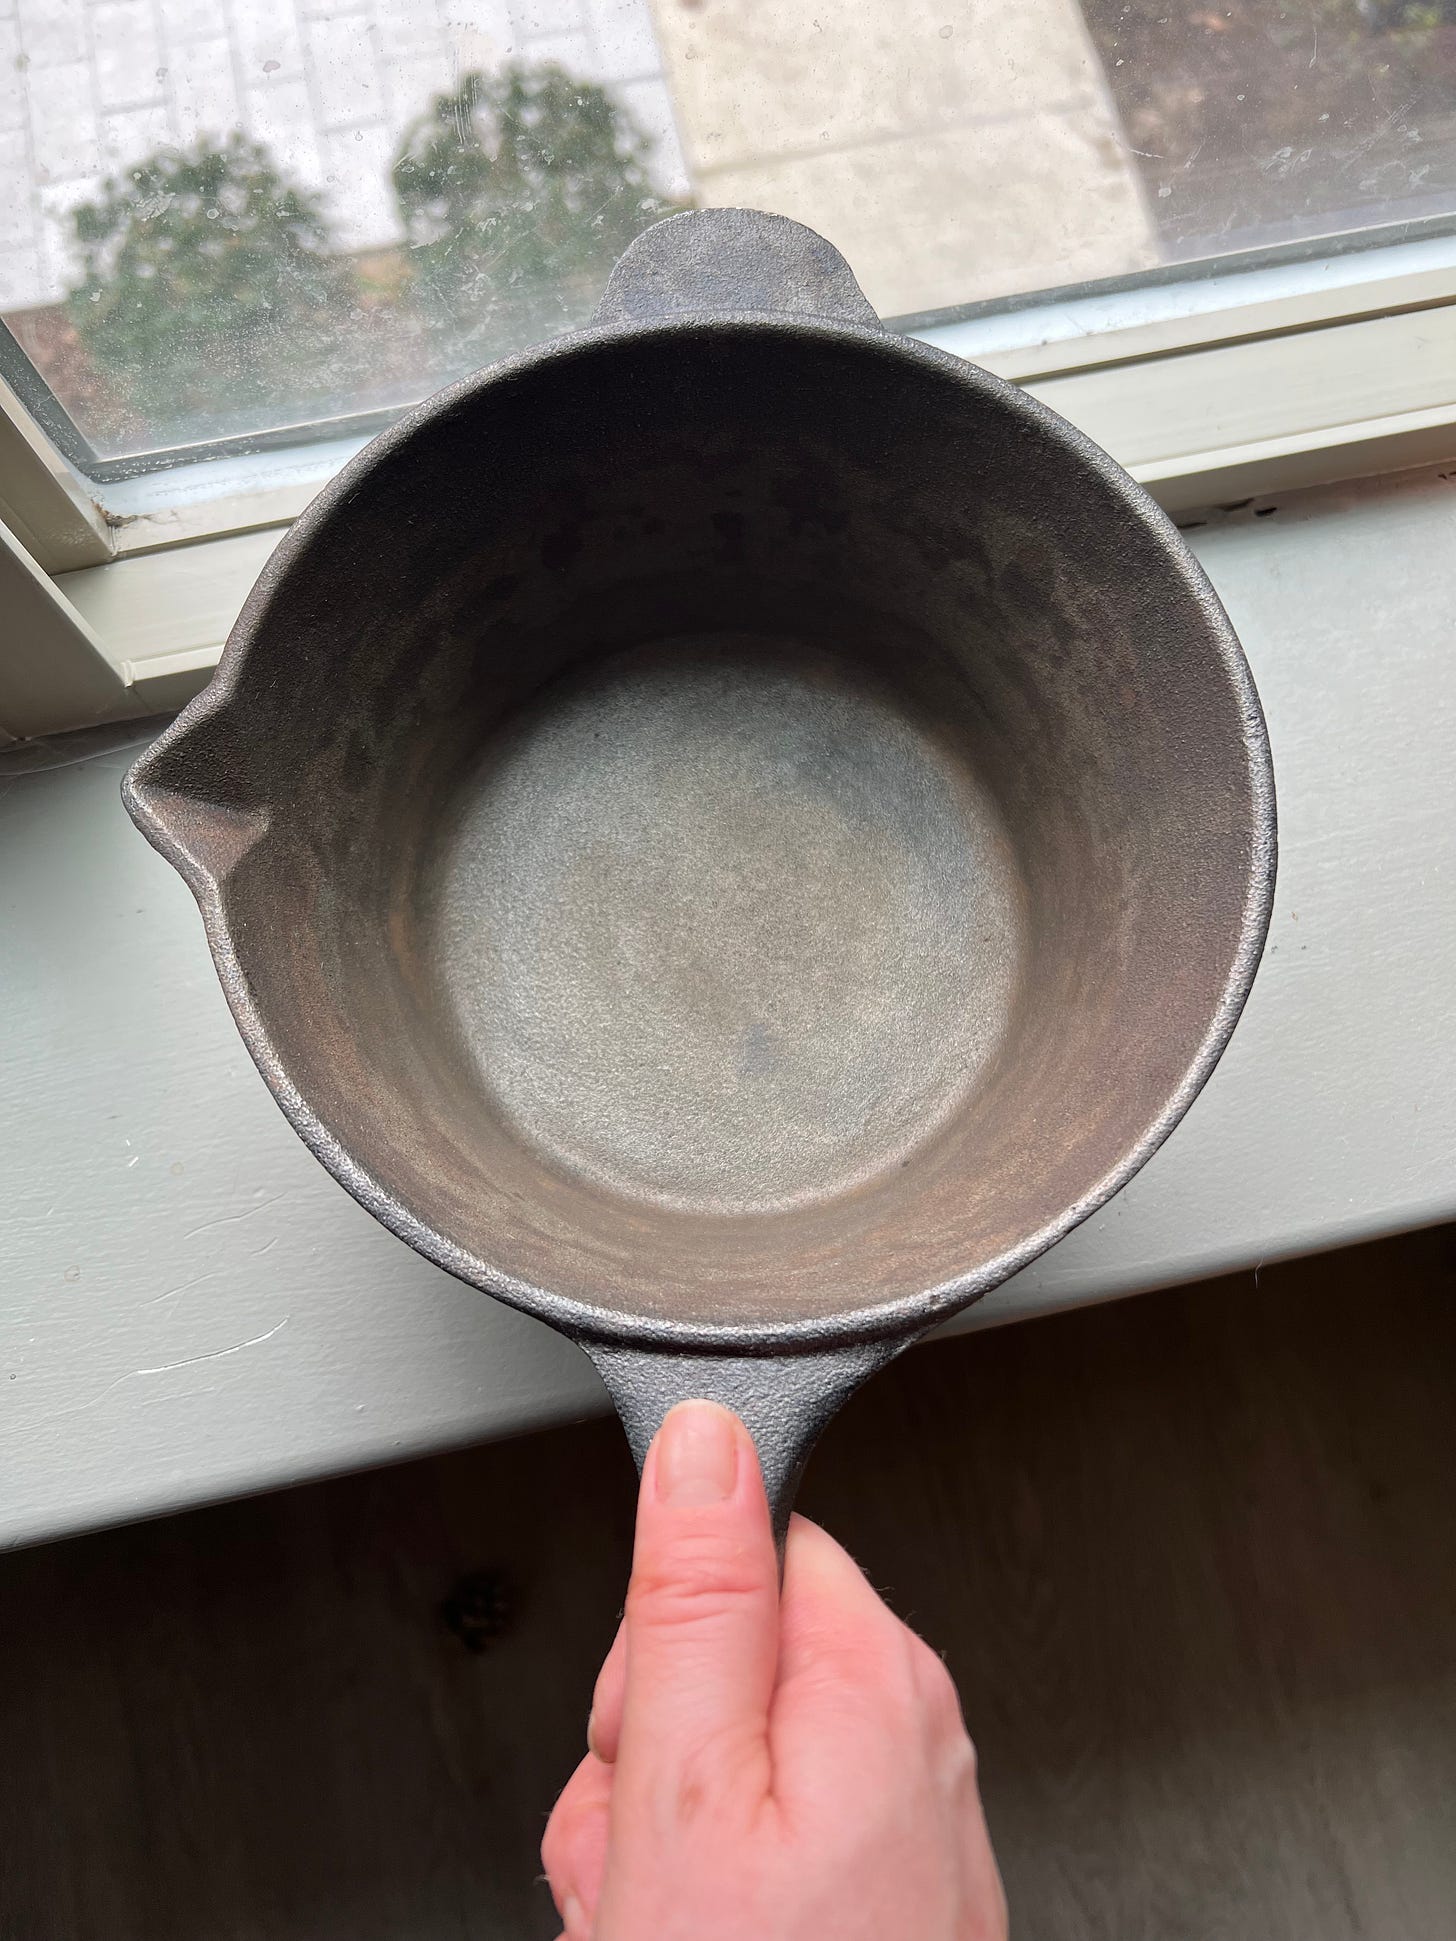 Image of EJW holding a newly cleaned cast iron pot on her windowsill